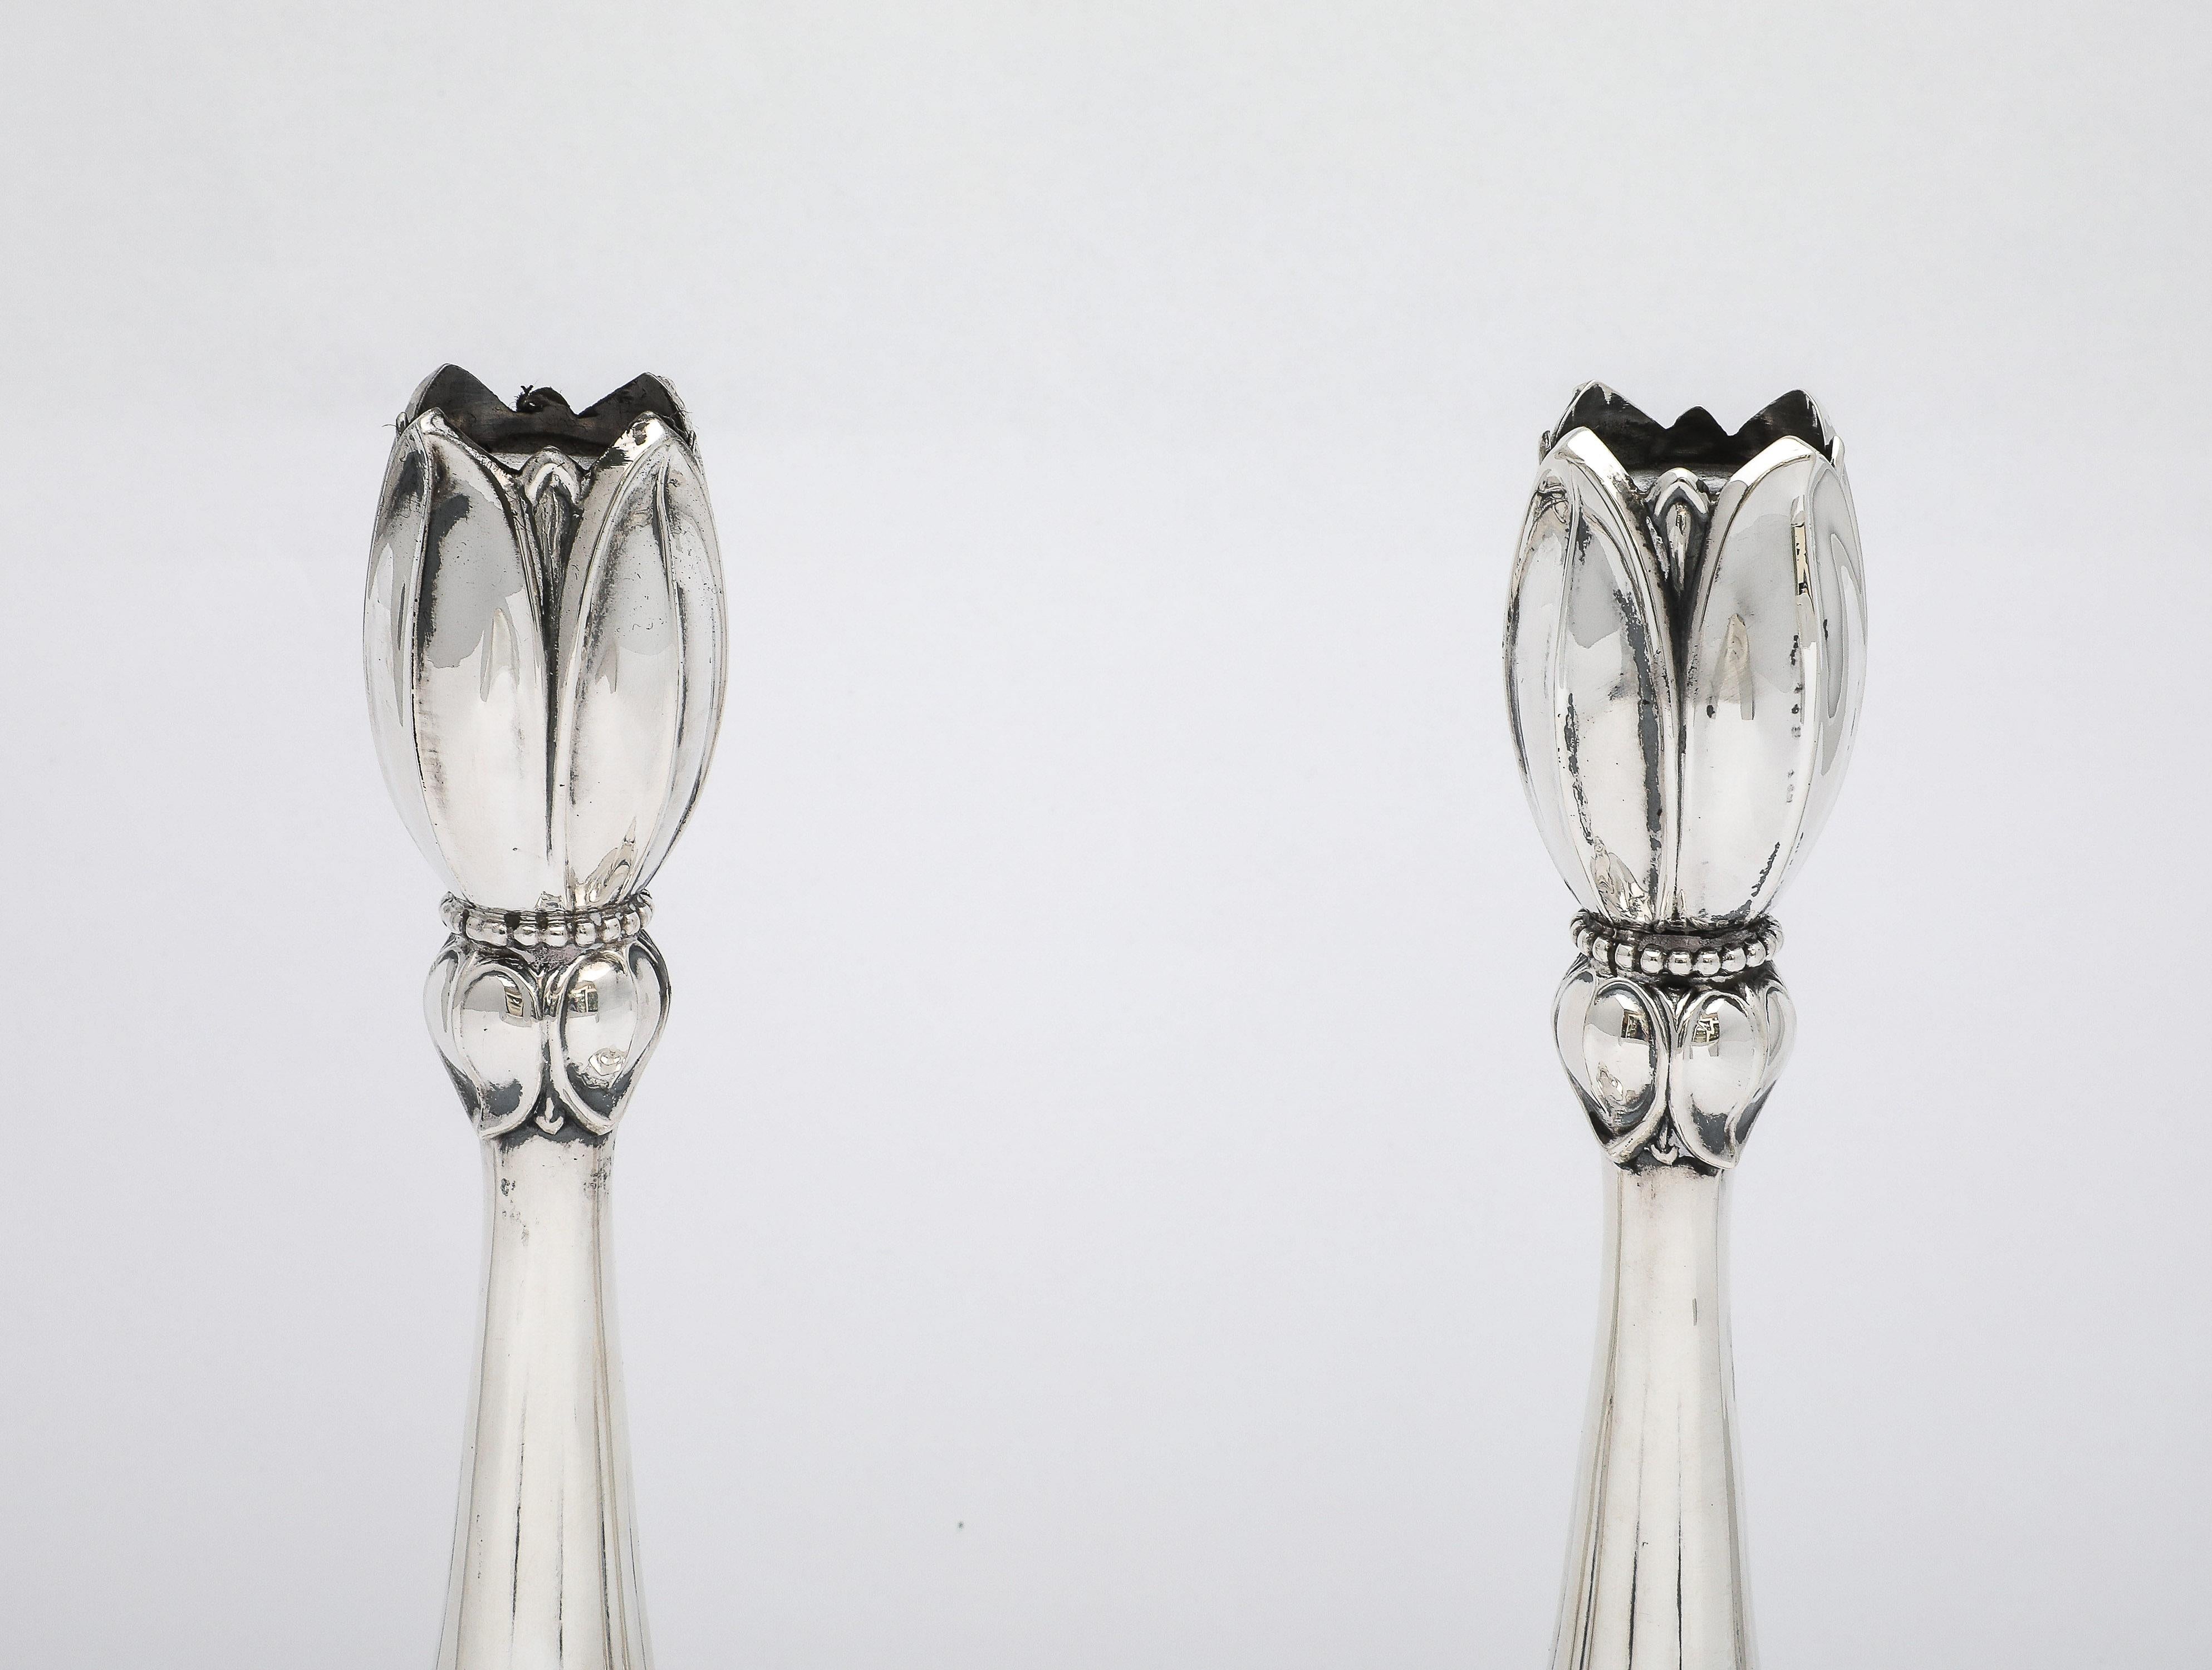 Rare Pair of Tall Sterling Silver Art Nouveau-Style Flower-Form Candlesticks For Sale 4